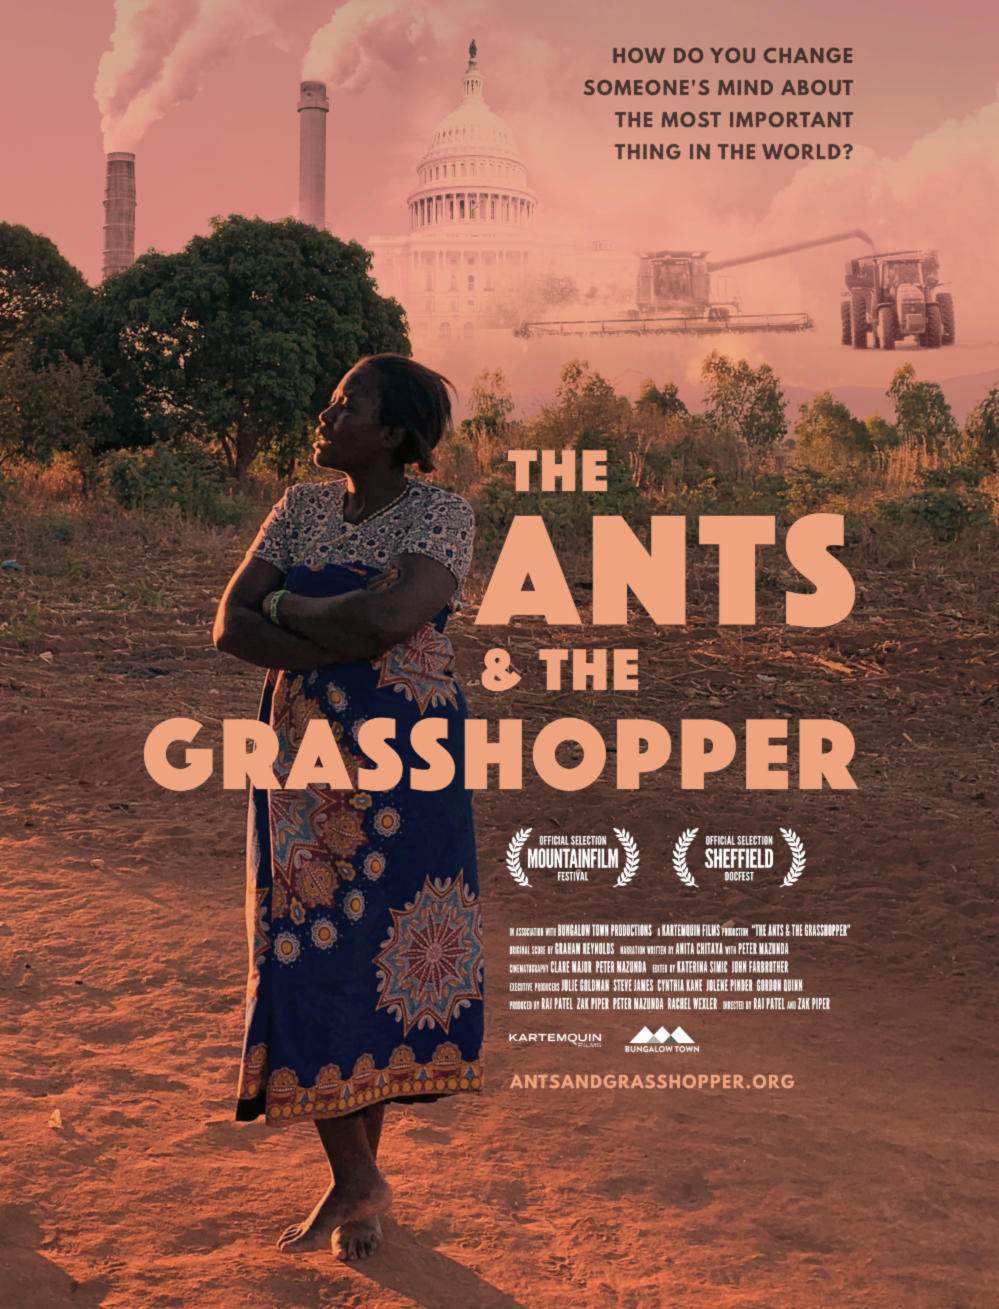 Film Poster: Anita Chitaya stands arms crossed on dirt ground, images of chimney smokes, DC, and combines in the background.